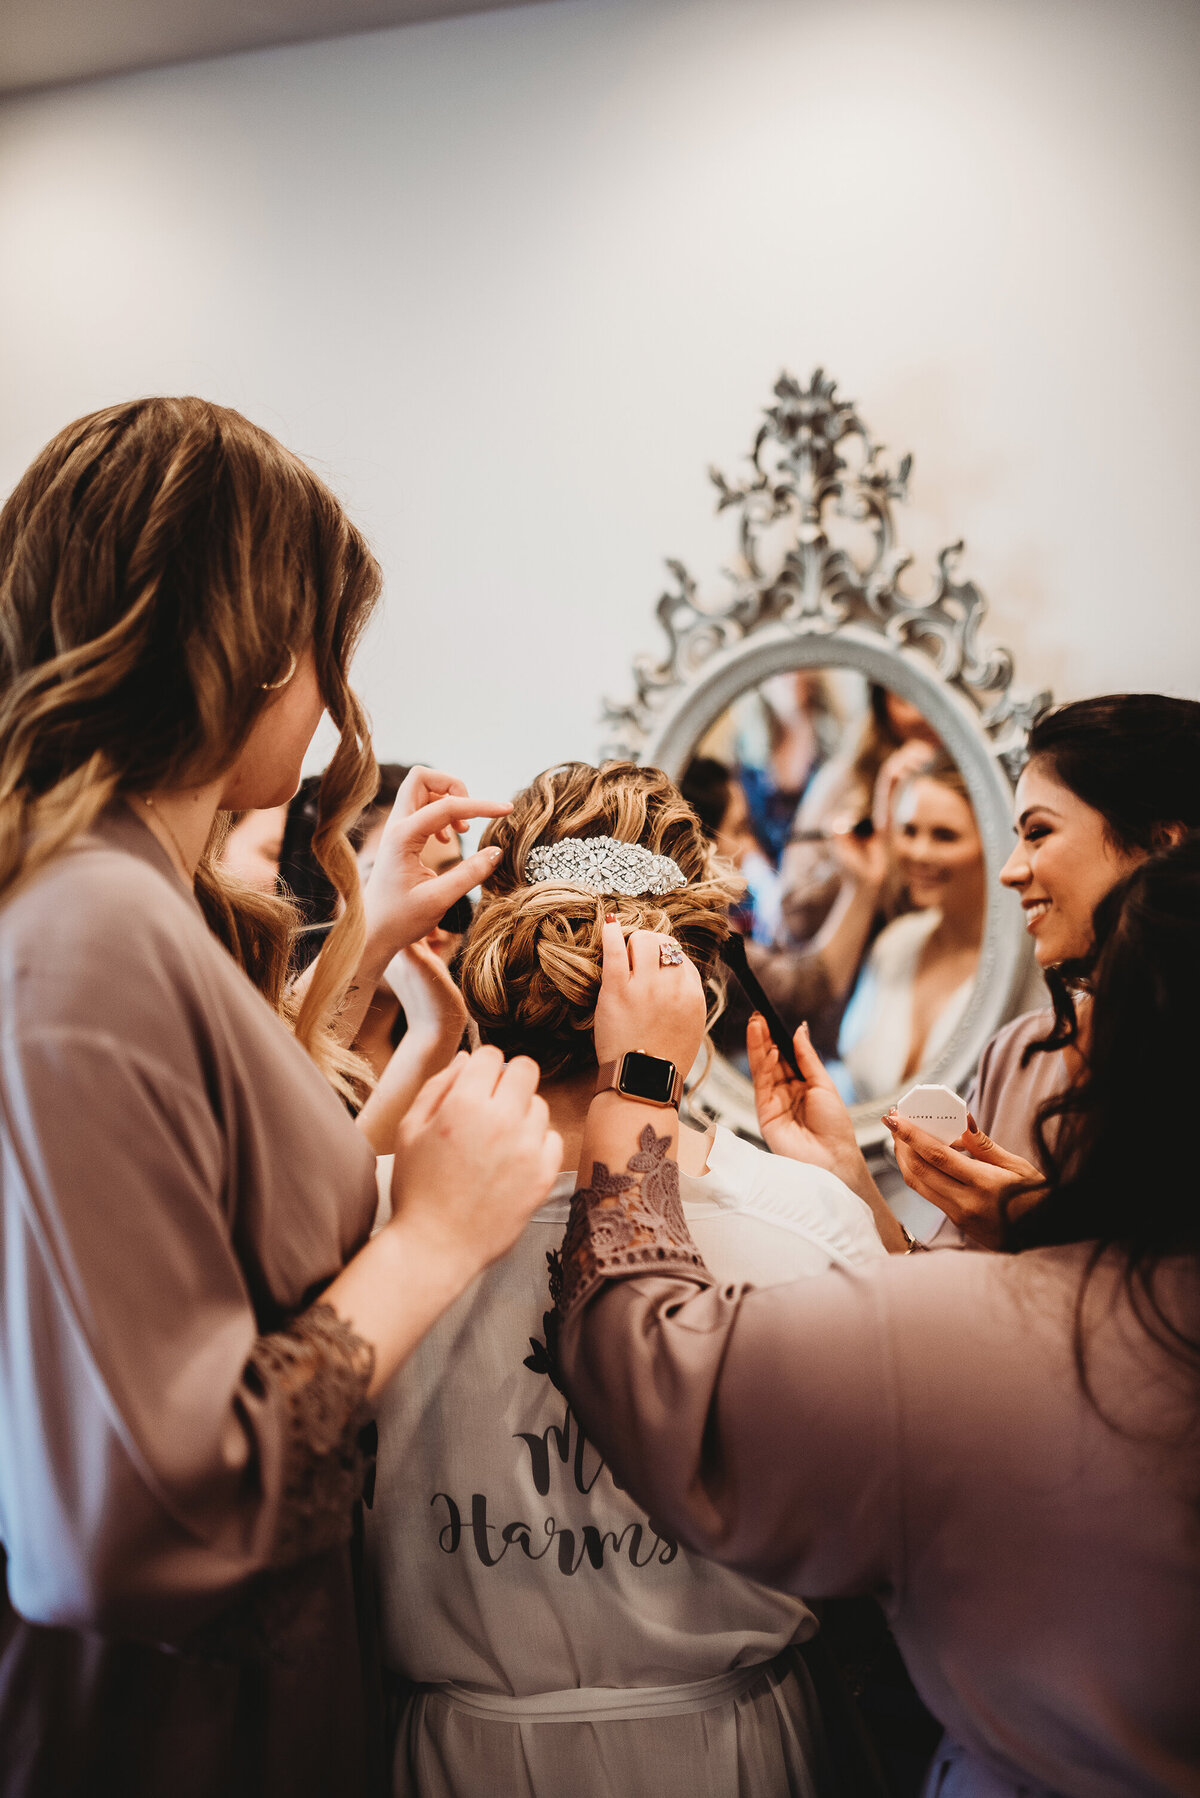 a bride surrounded by her bridesmaids fussing about her on her wedding day